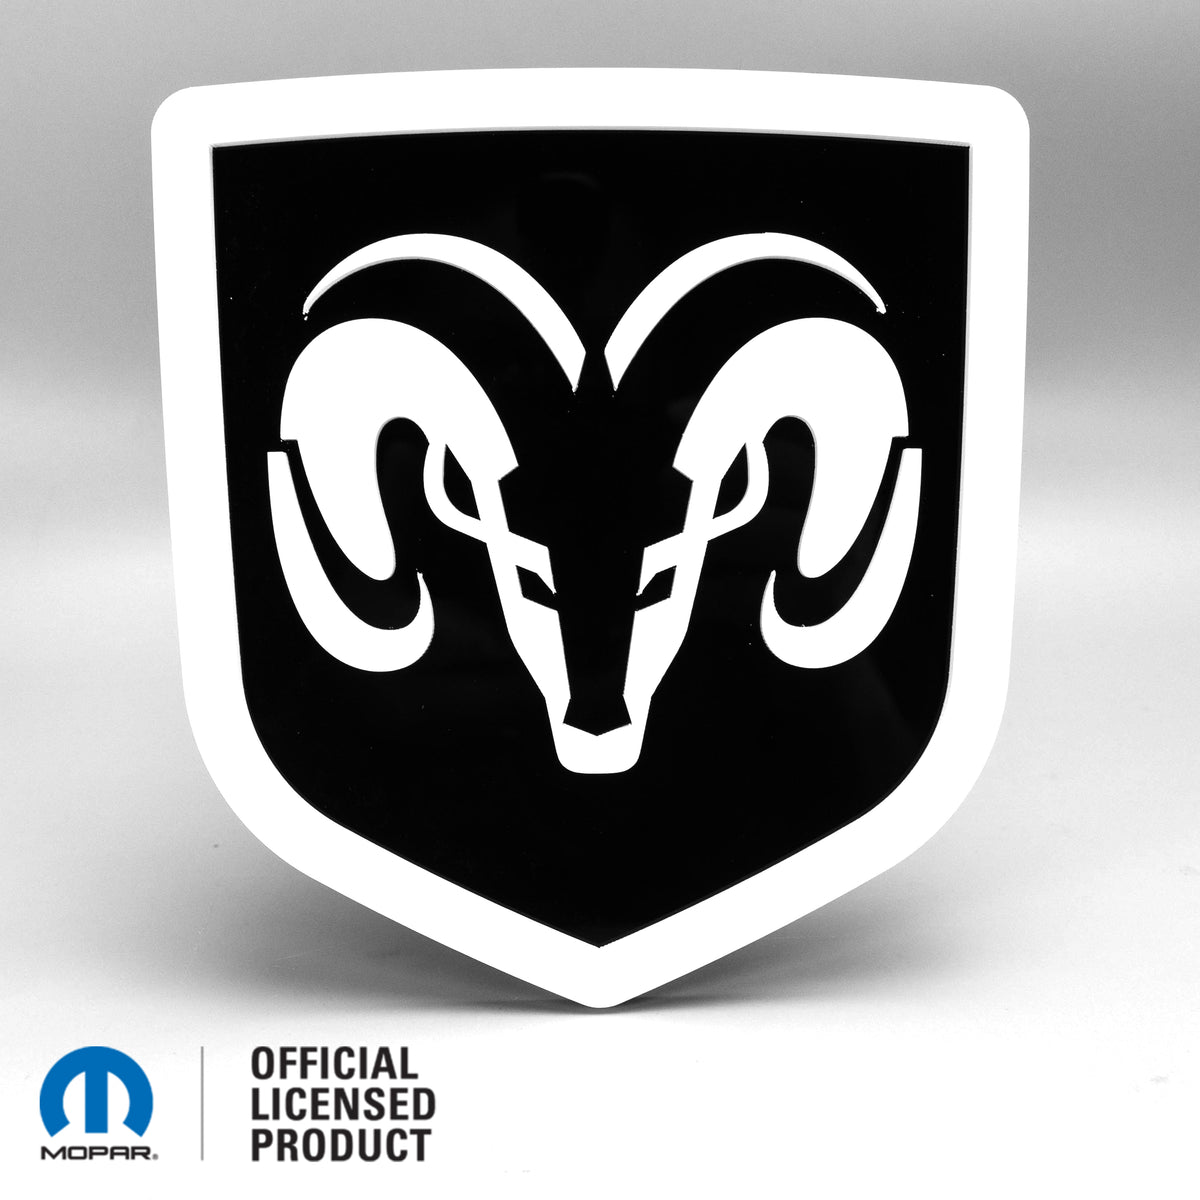 RAM® HEAD LOGO STYLE 1 TAILGATE BADGE - FITS 2009-2018 DODGE® RAM® TAILGATE -1500, 2500, 3500 - WHITE ON GLOSS - Officially Licensed Product